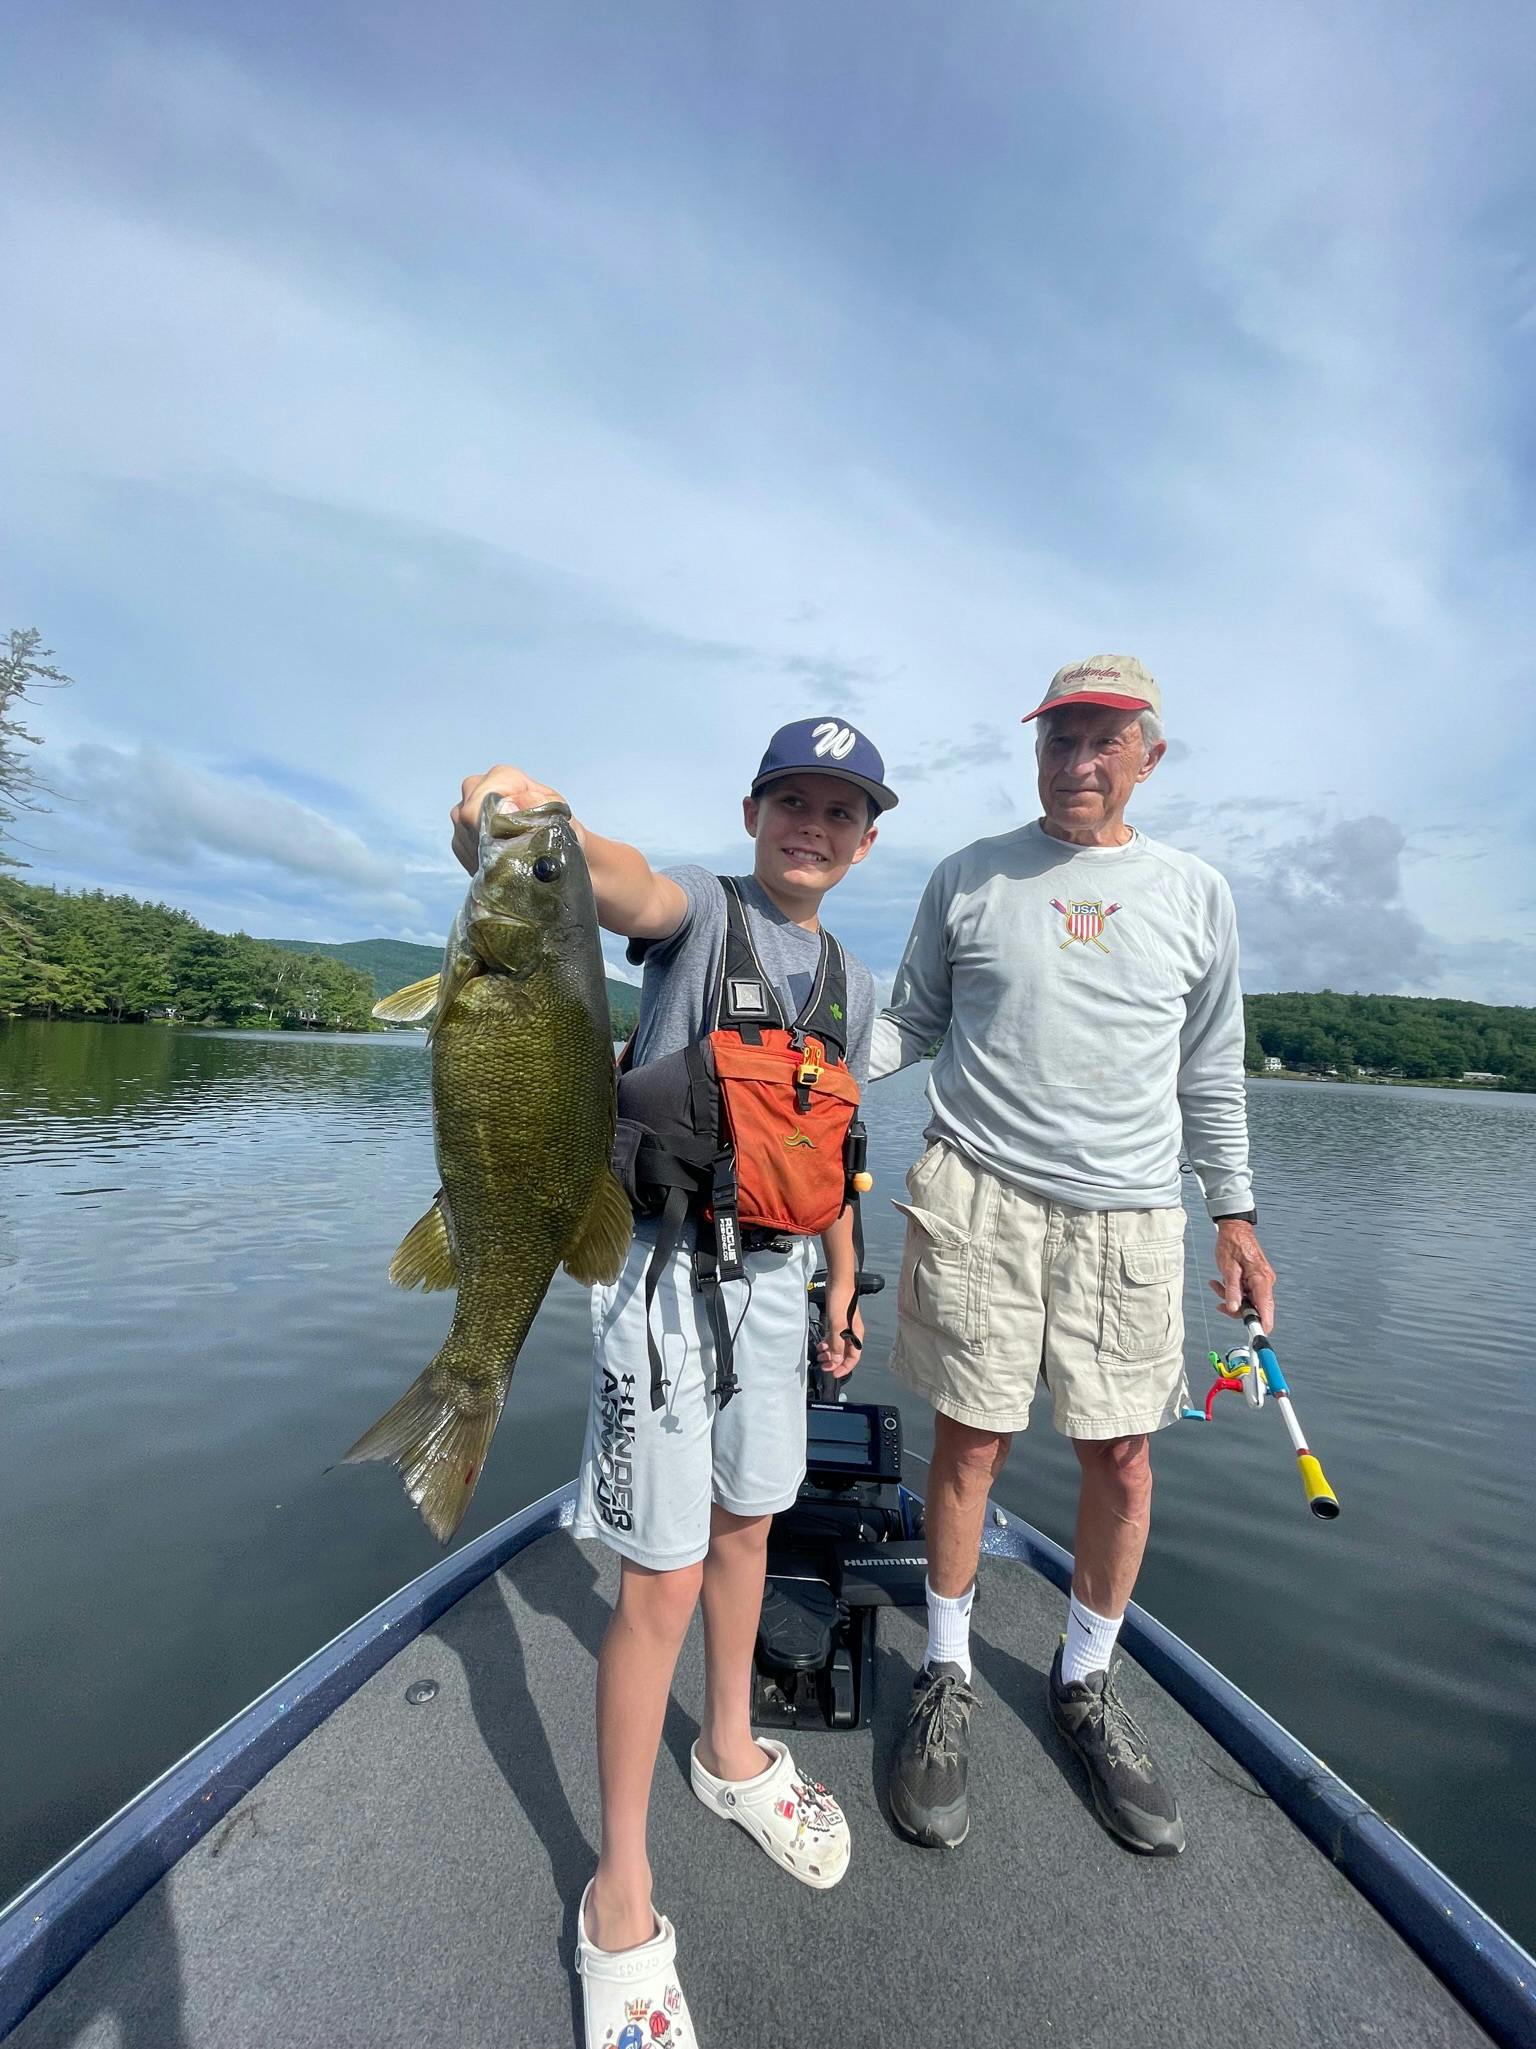 Boy in blue baseball hat and white crocs holding smallmouth bass next to grandfather wearing grey shirt and khaki cargo shorts on blue boat